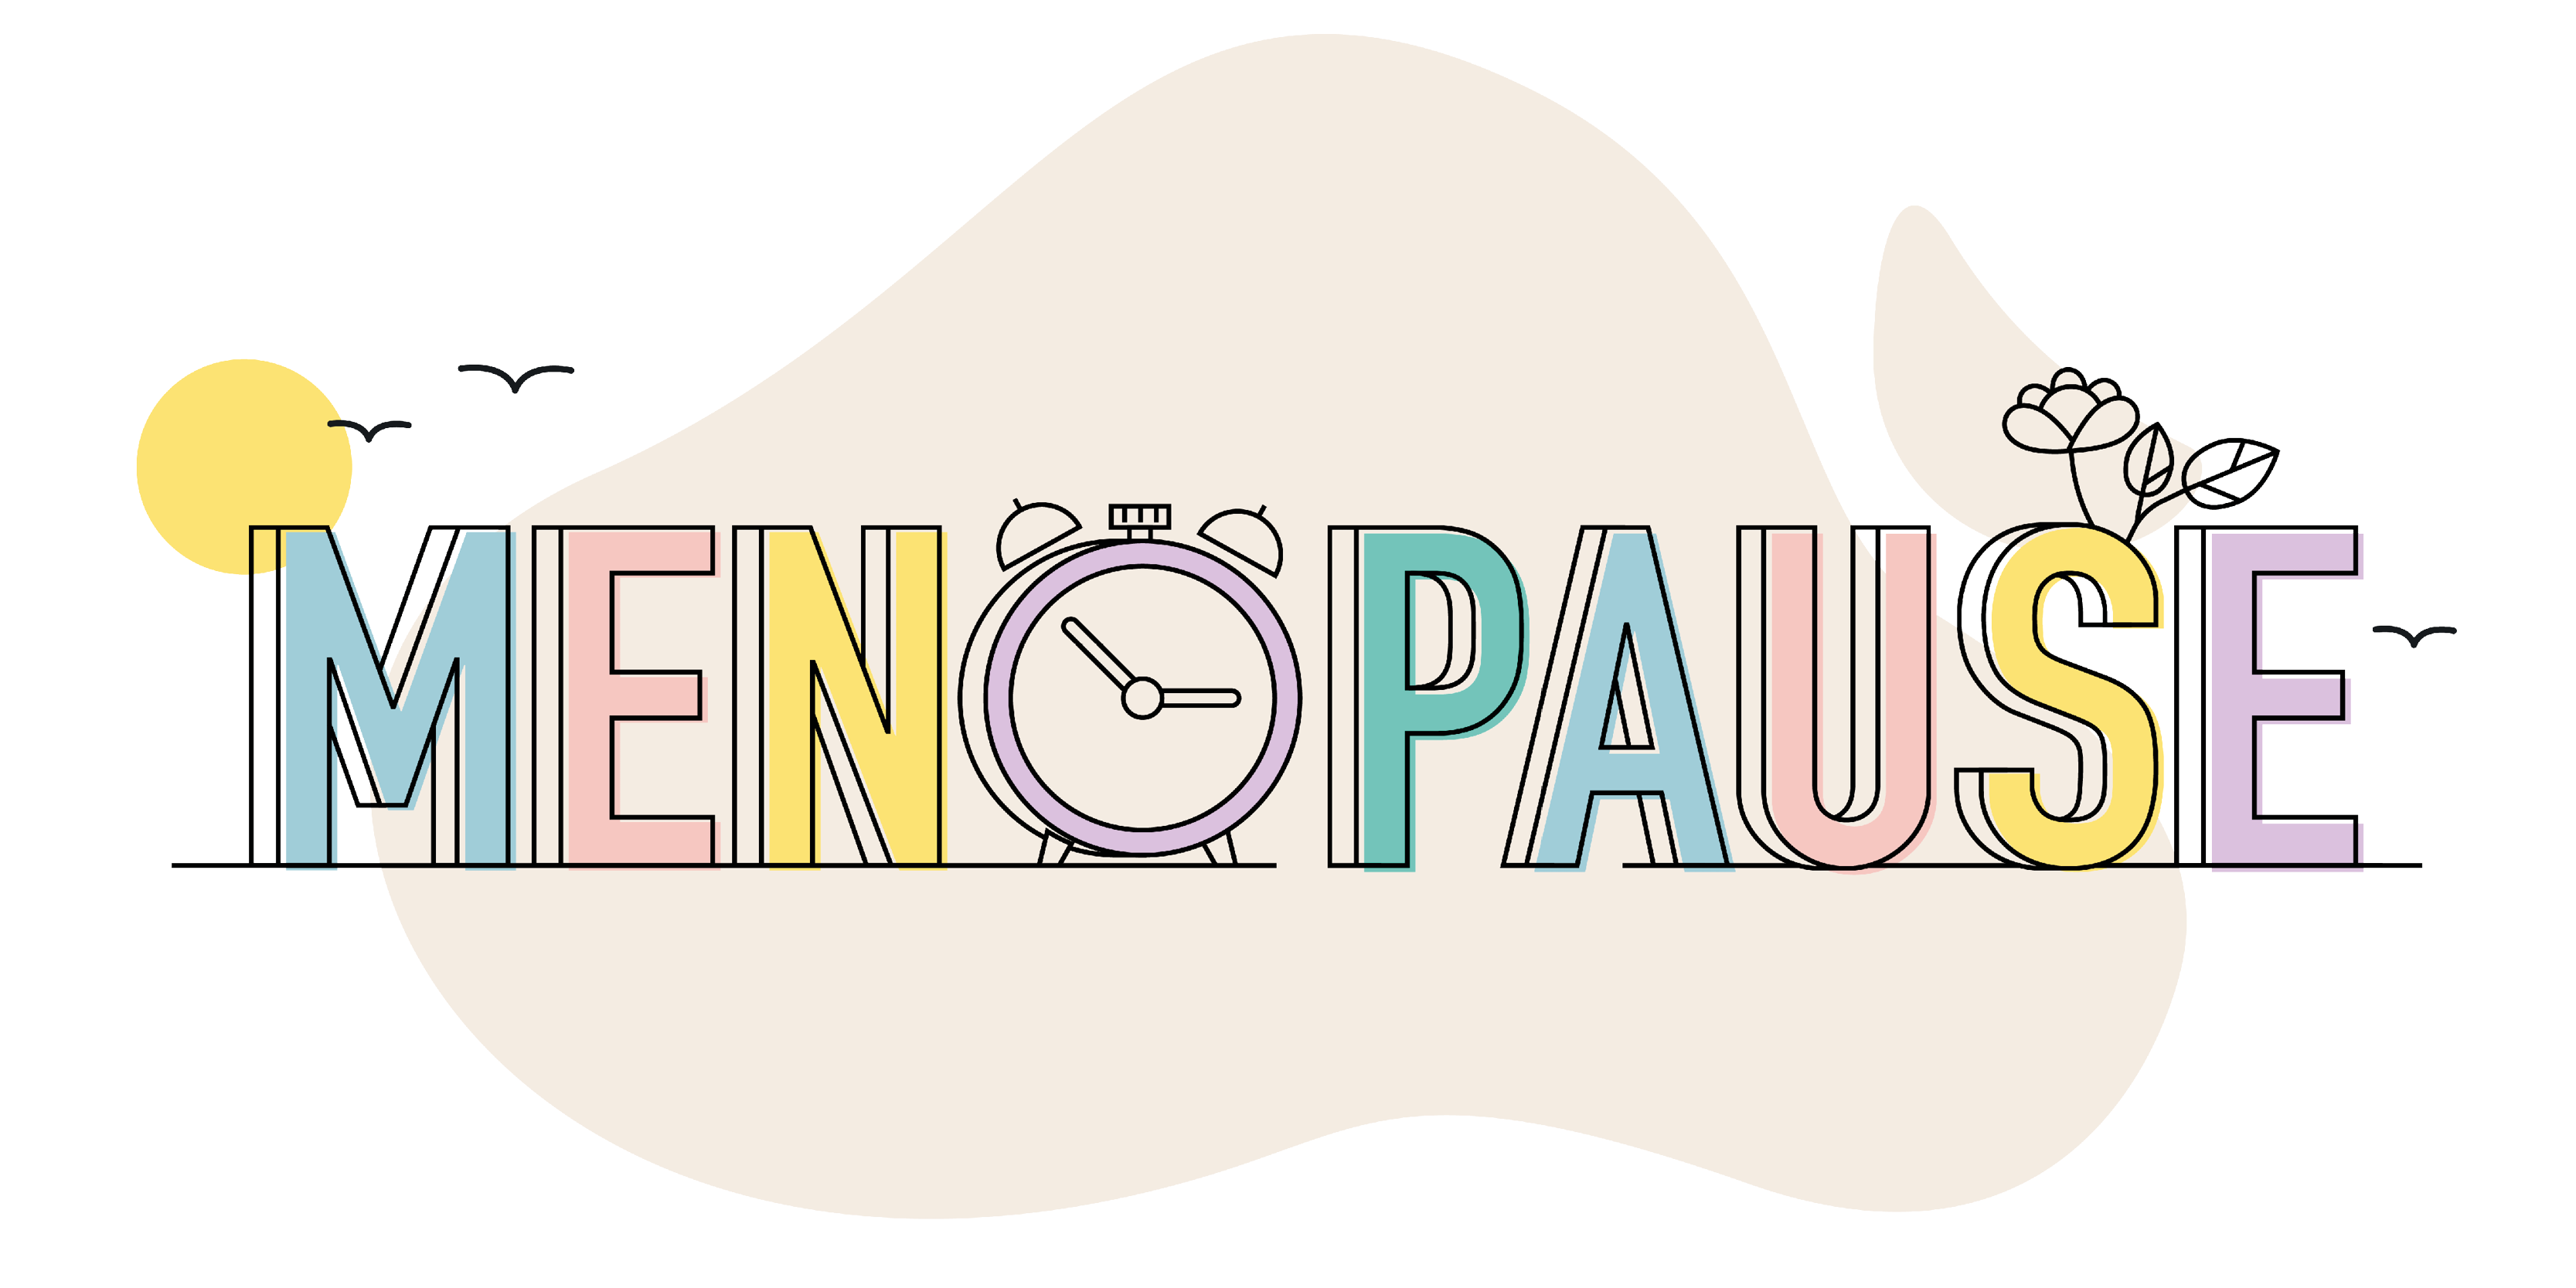 Illustrative text of the word Menopause. The O is shown as a clock